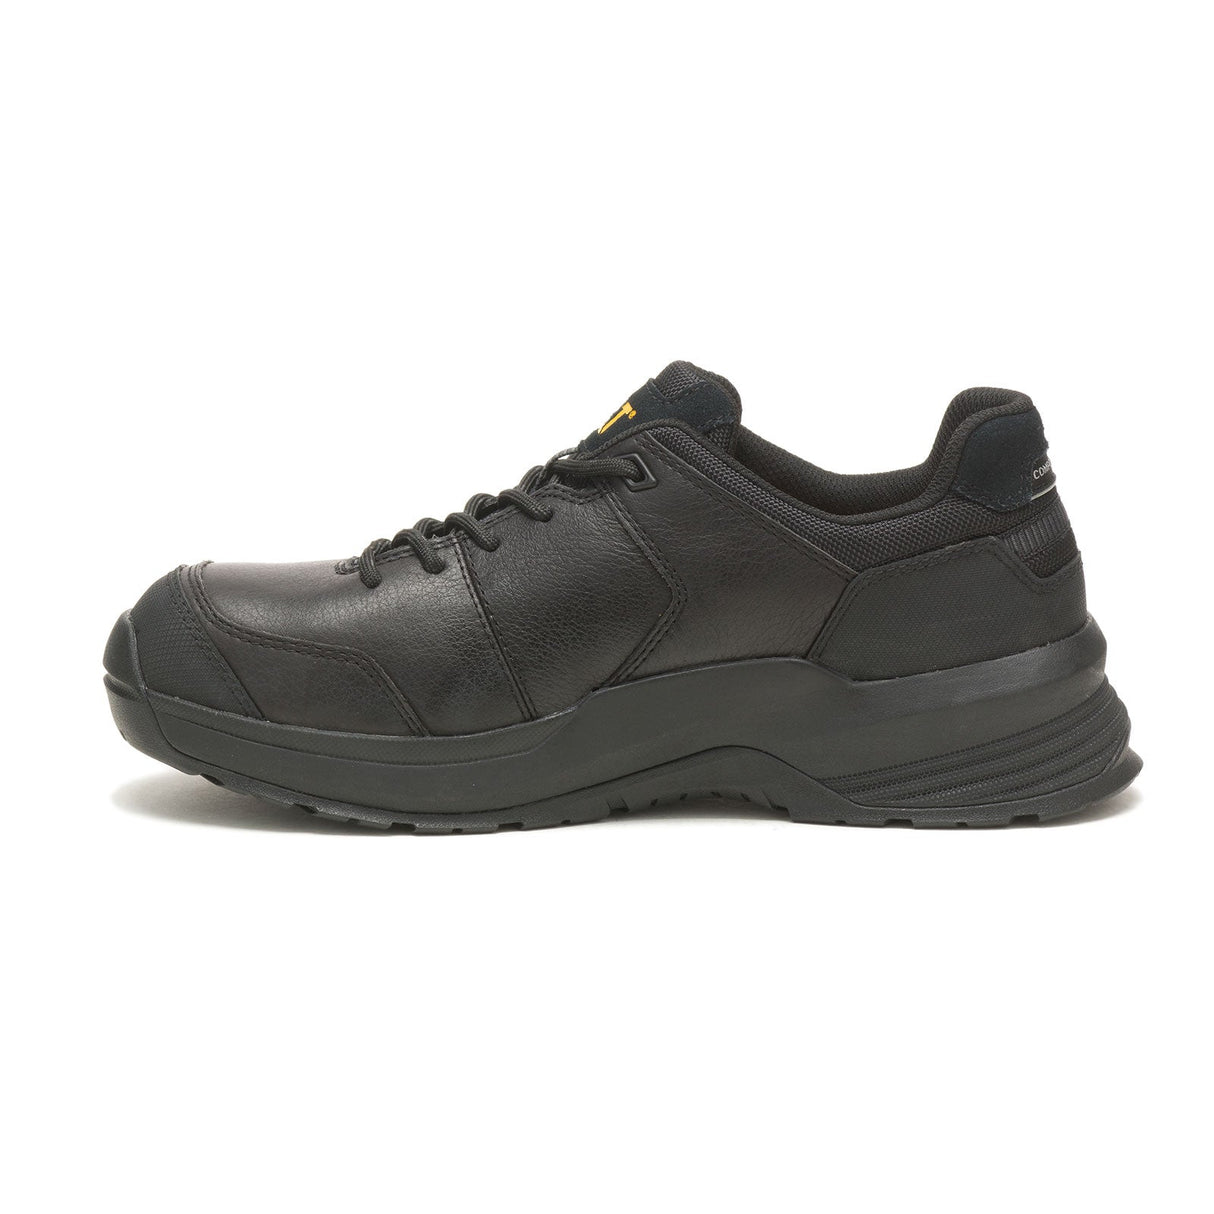 Caterpillar Streamline 2 Le At Her Men's Composite-Toe Work Shoes P91351-2